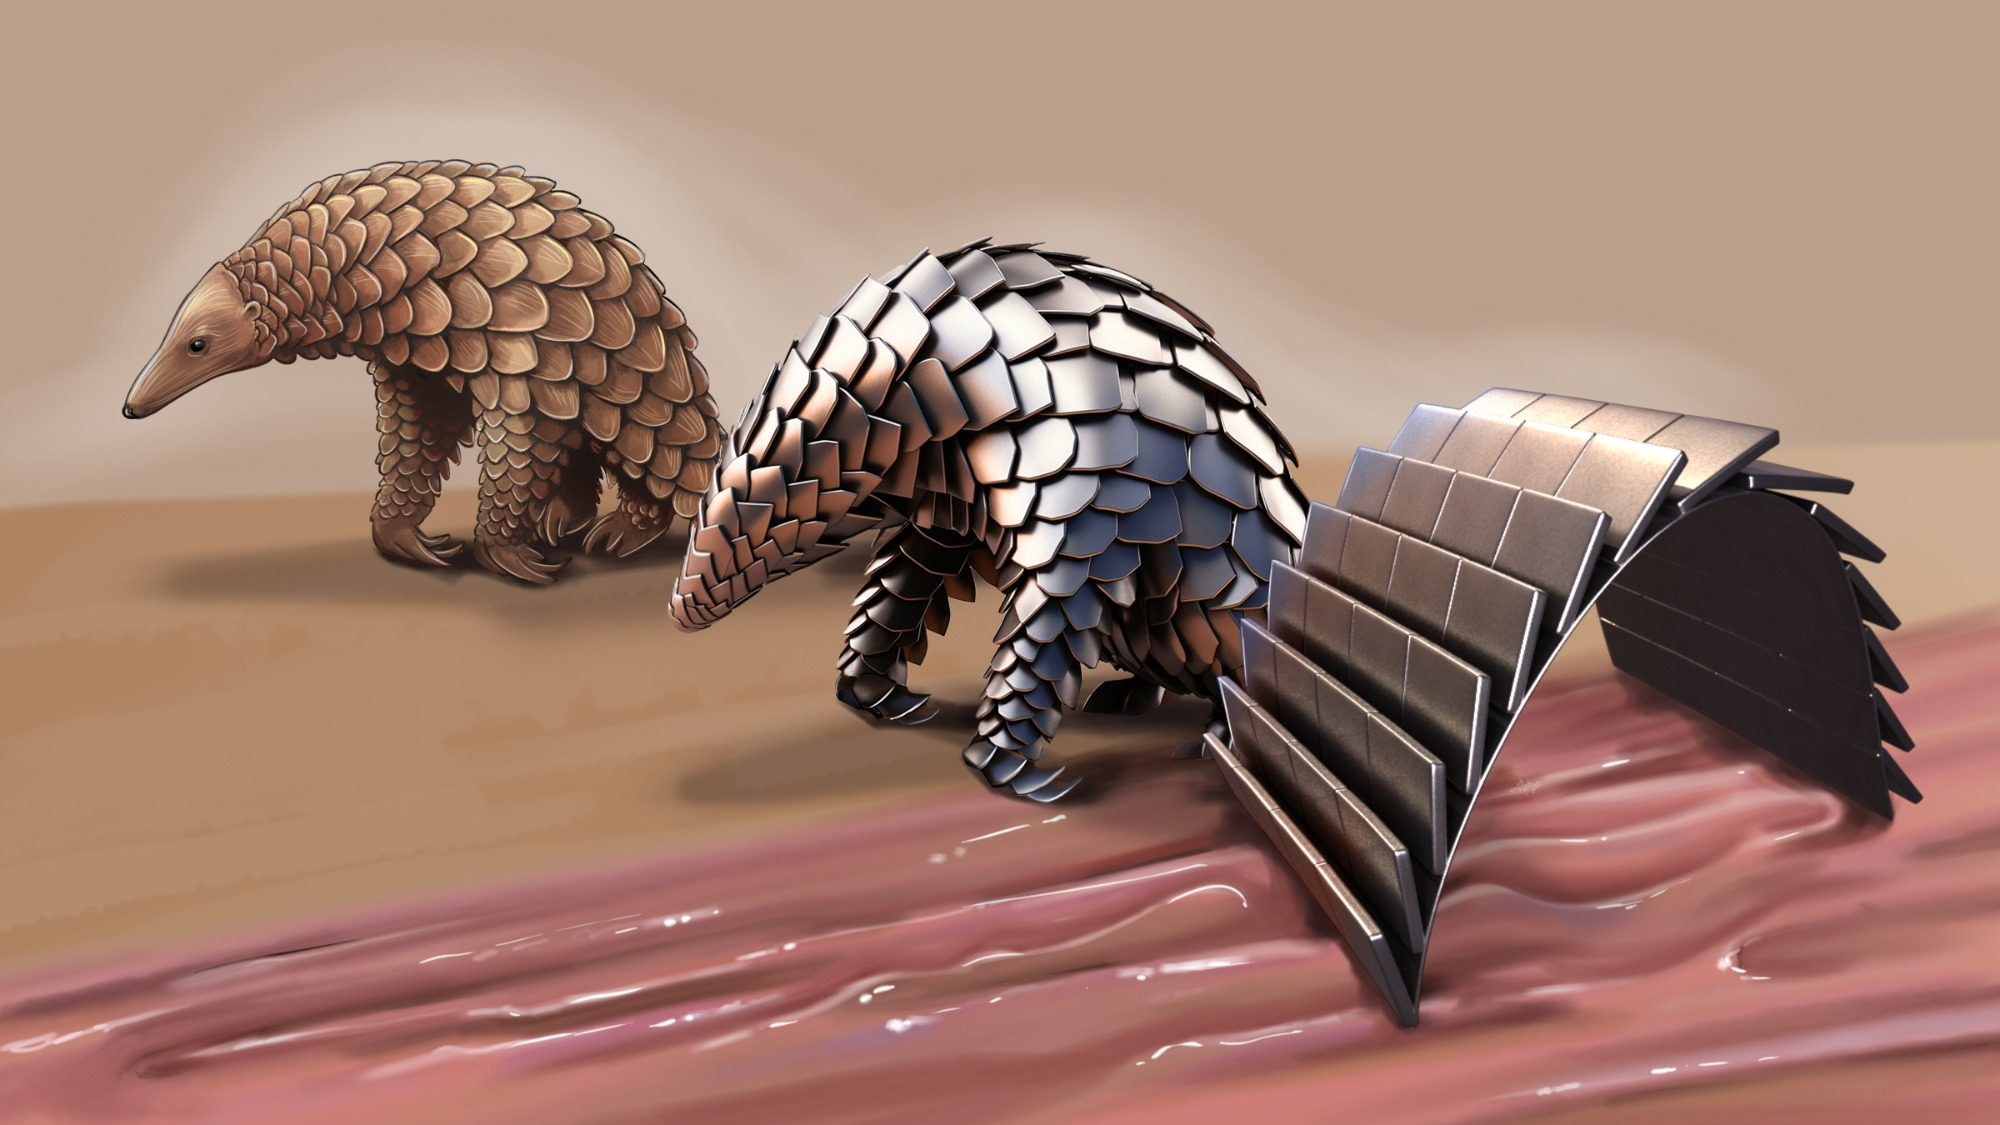 This pangolin-inspired robot can curl up into a healing ball